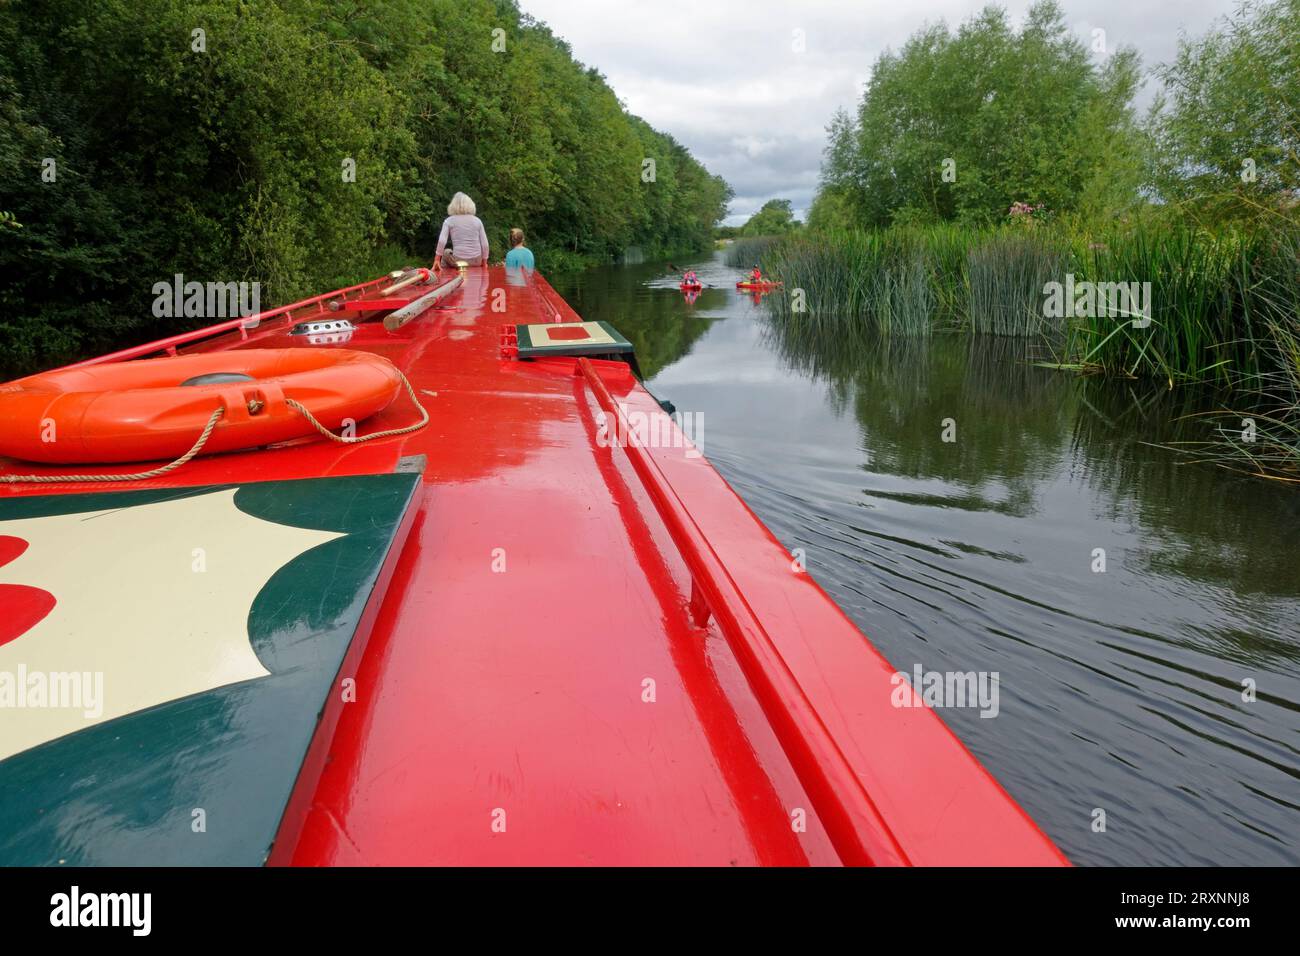 People on red narrowboatd watching paddleboarders on quiet stretch of the River Avon near Evesham UK Stock Photo